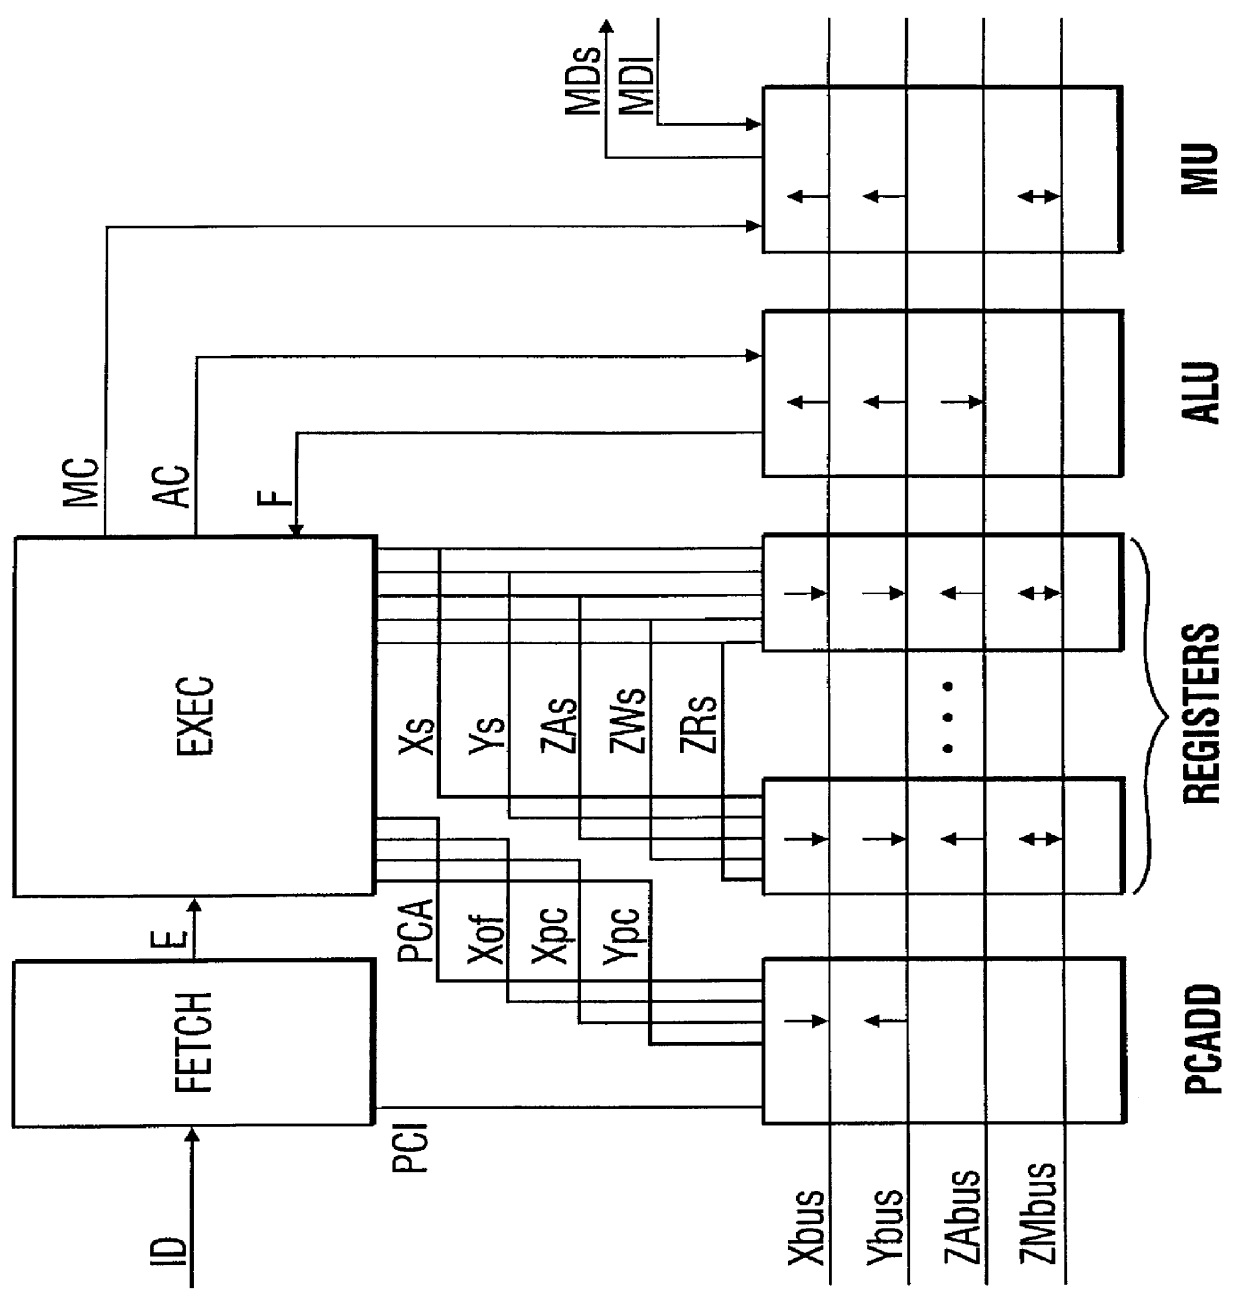 Circuit implementations for asynchronous processors